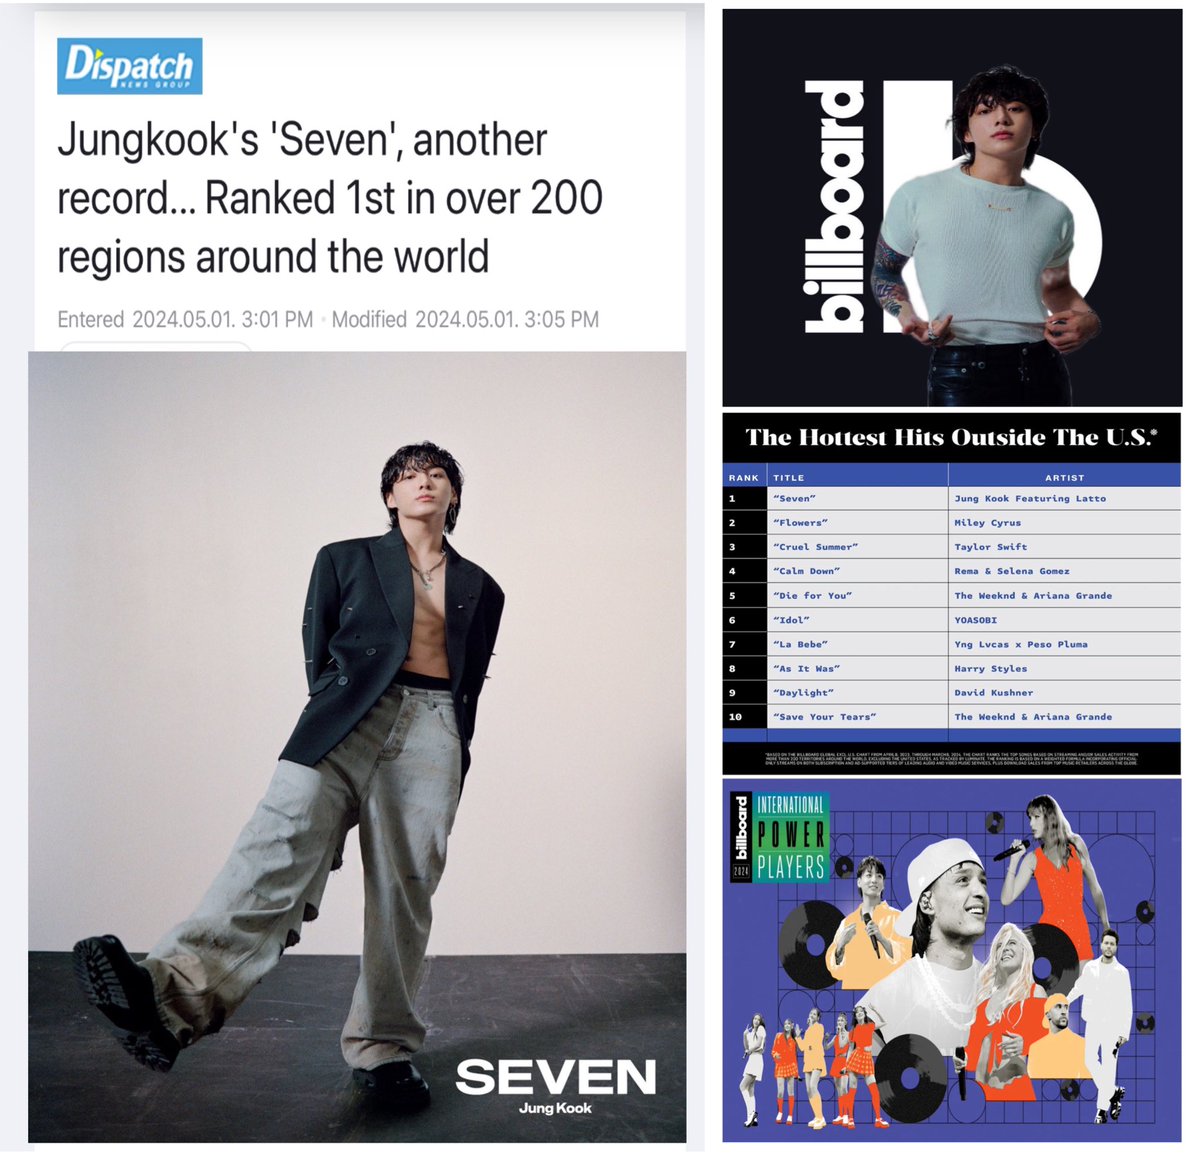 Various Korean Media reported that “Jungkook's 'Seven' sets another record... 'Seven' was selected as the MOST POPULAR and MOST LOVED song as it RANKED No.1 in over 200 countries/regions around the world, excluding the United States ” Jungkook's solo single ‘SEVEN' is the No. 1